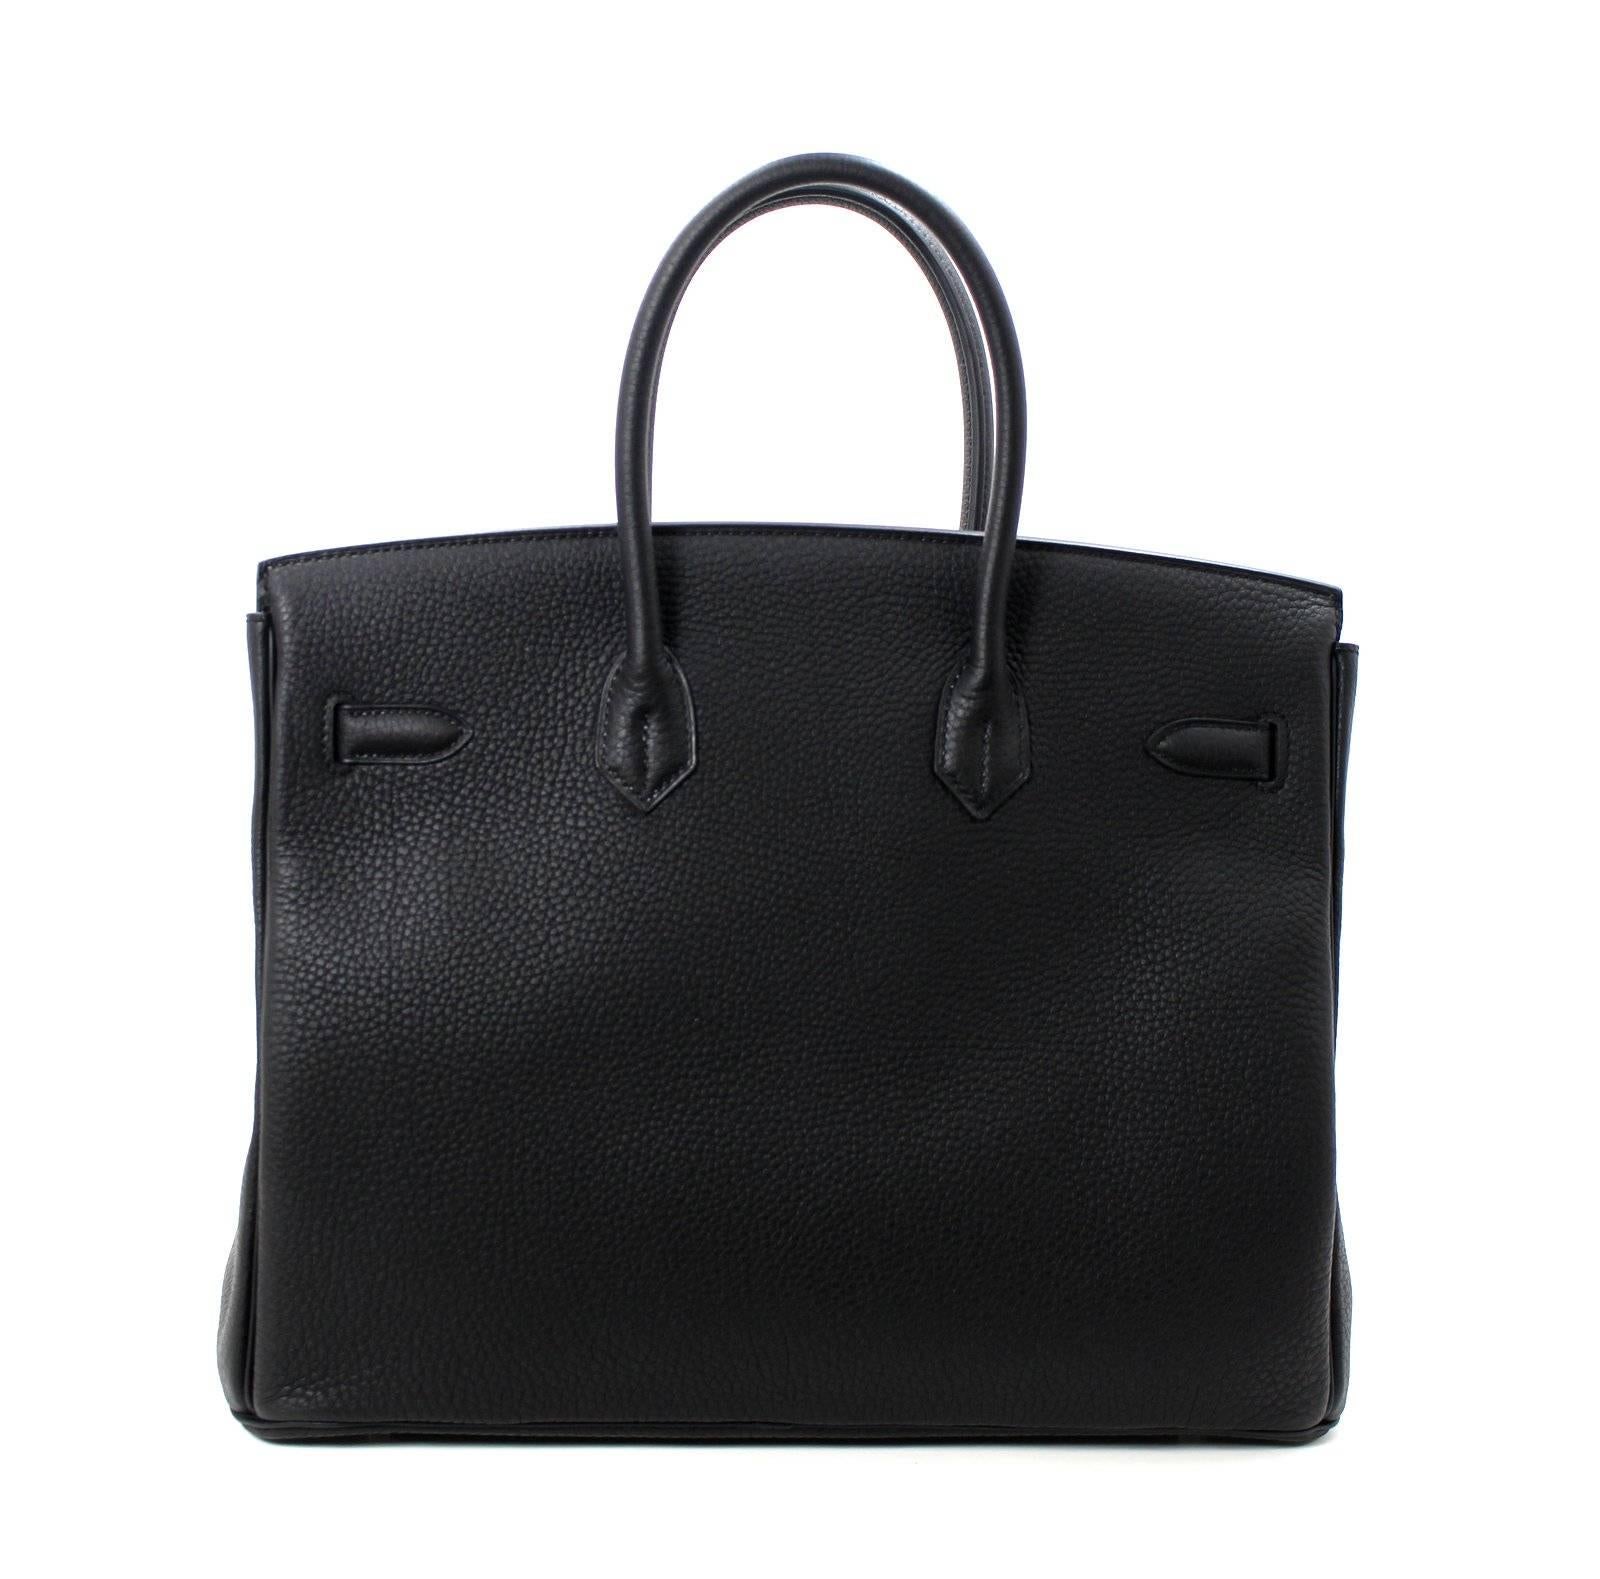 Pristine, store fresh condition (plastic on hardware) Hermès Birkin Bag in BLACK Togo, PHW 35 cm, T stamp
Purchase includes padlock, keys, clochette, protective felt, raincoat, dust bags and Hermès box with tissue. 
Crafted by hand and